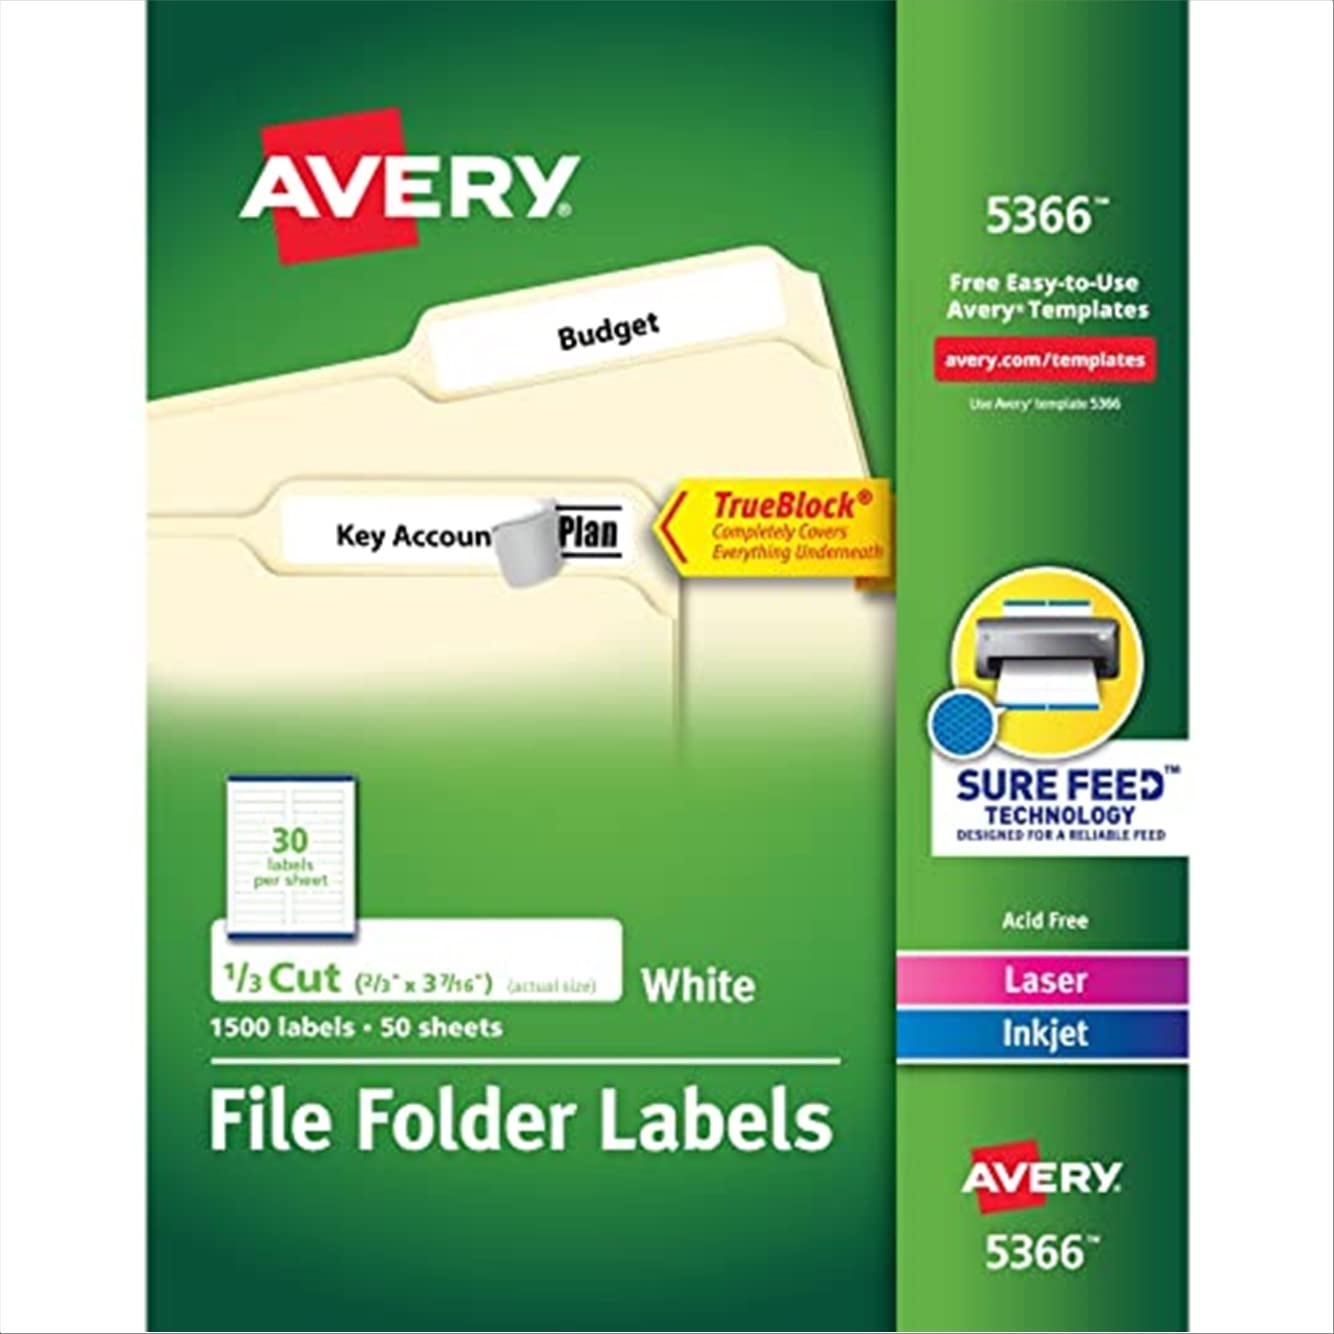 Avery File Folder Labels for Laser and Ink Jet Printers with TrueBlock Technology